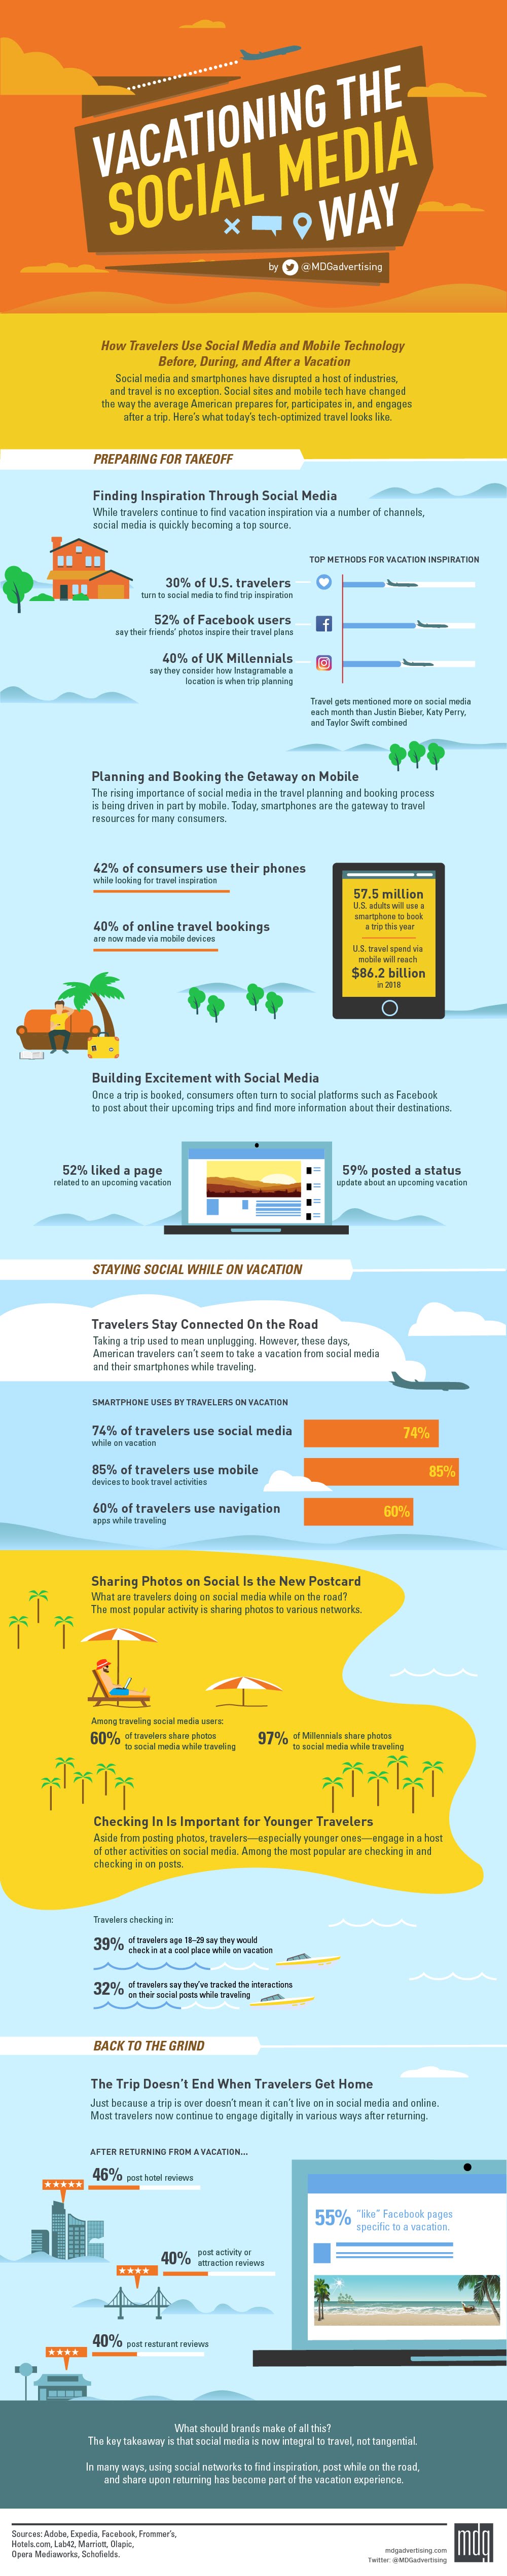 Today’s Travelers Are Vacationing the Social Media Way - #infographic